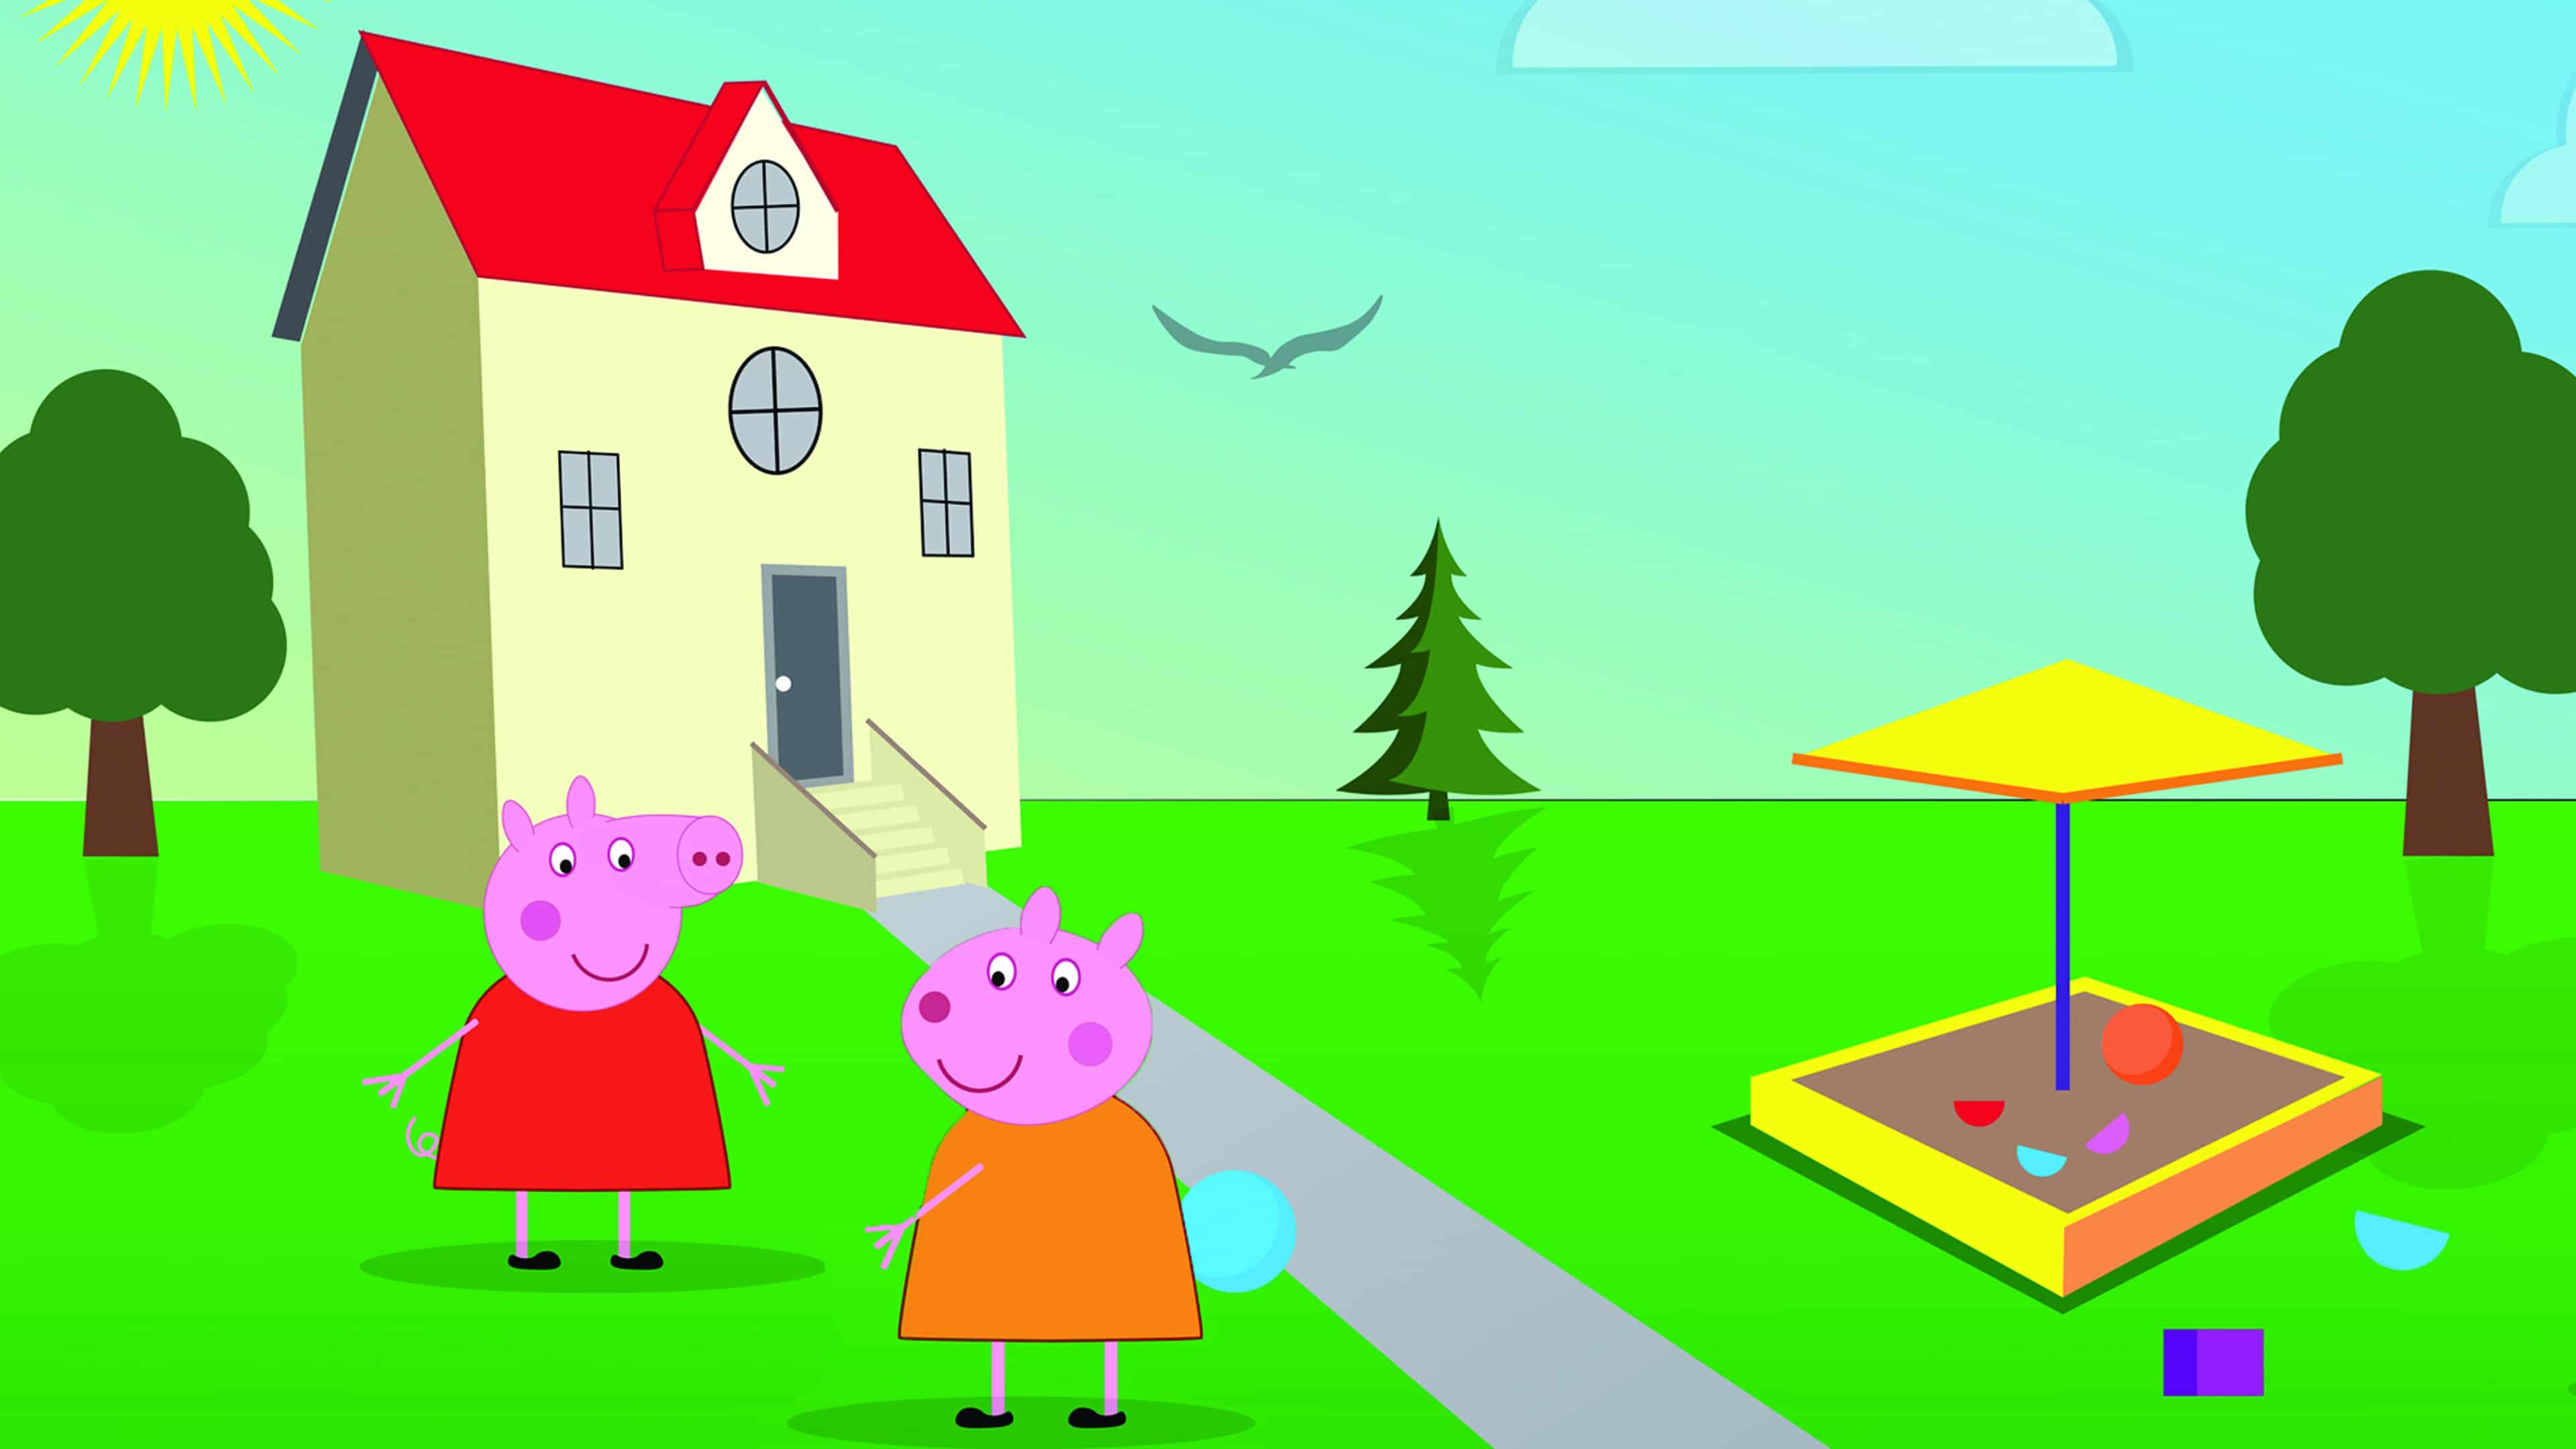 Peppa Pig House Wallpapers on WallpaperDog